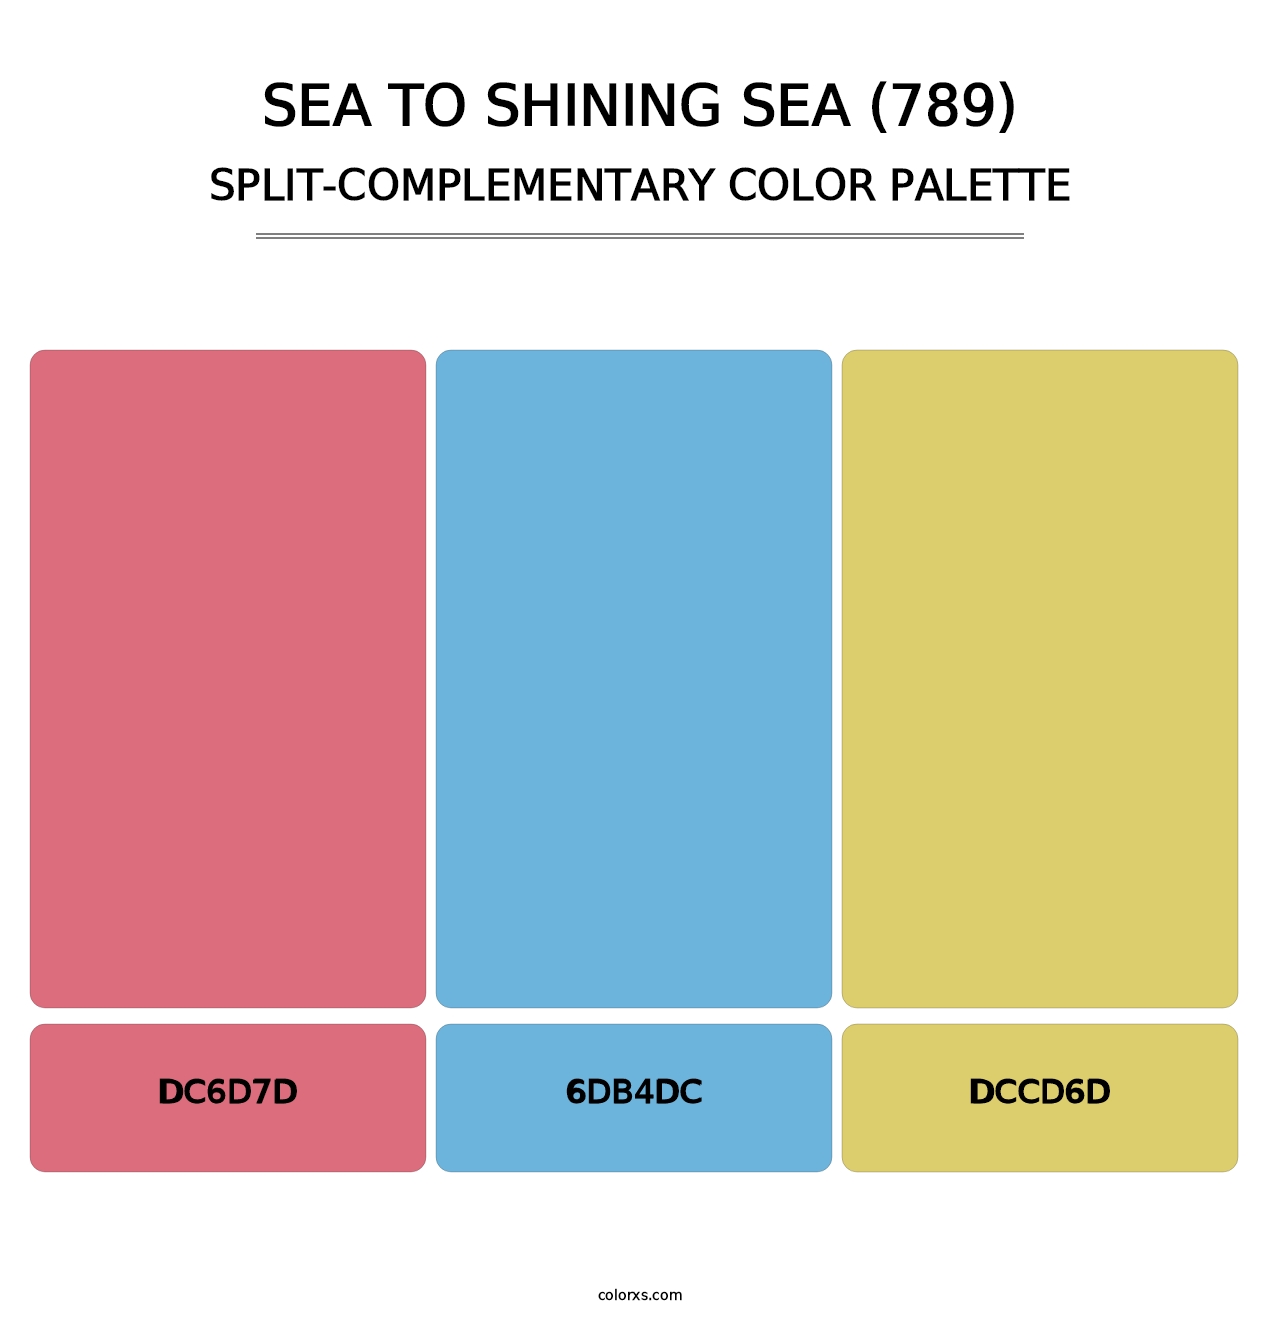 Sea to Shining Sea (789) - Split-Complementary Color Palette